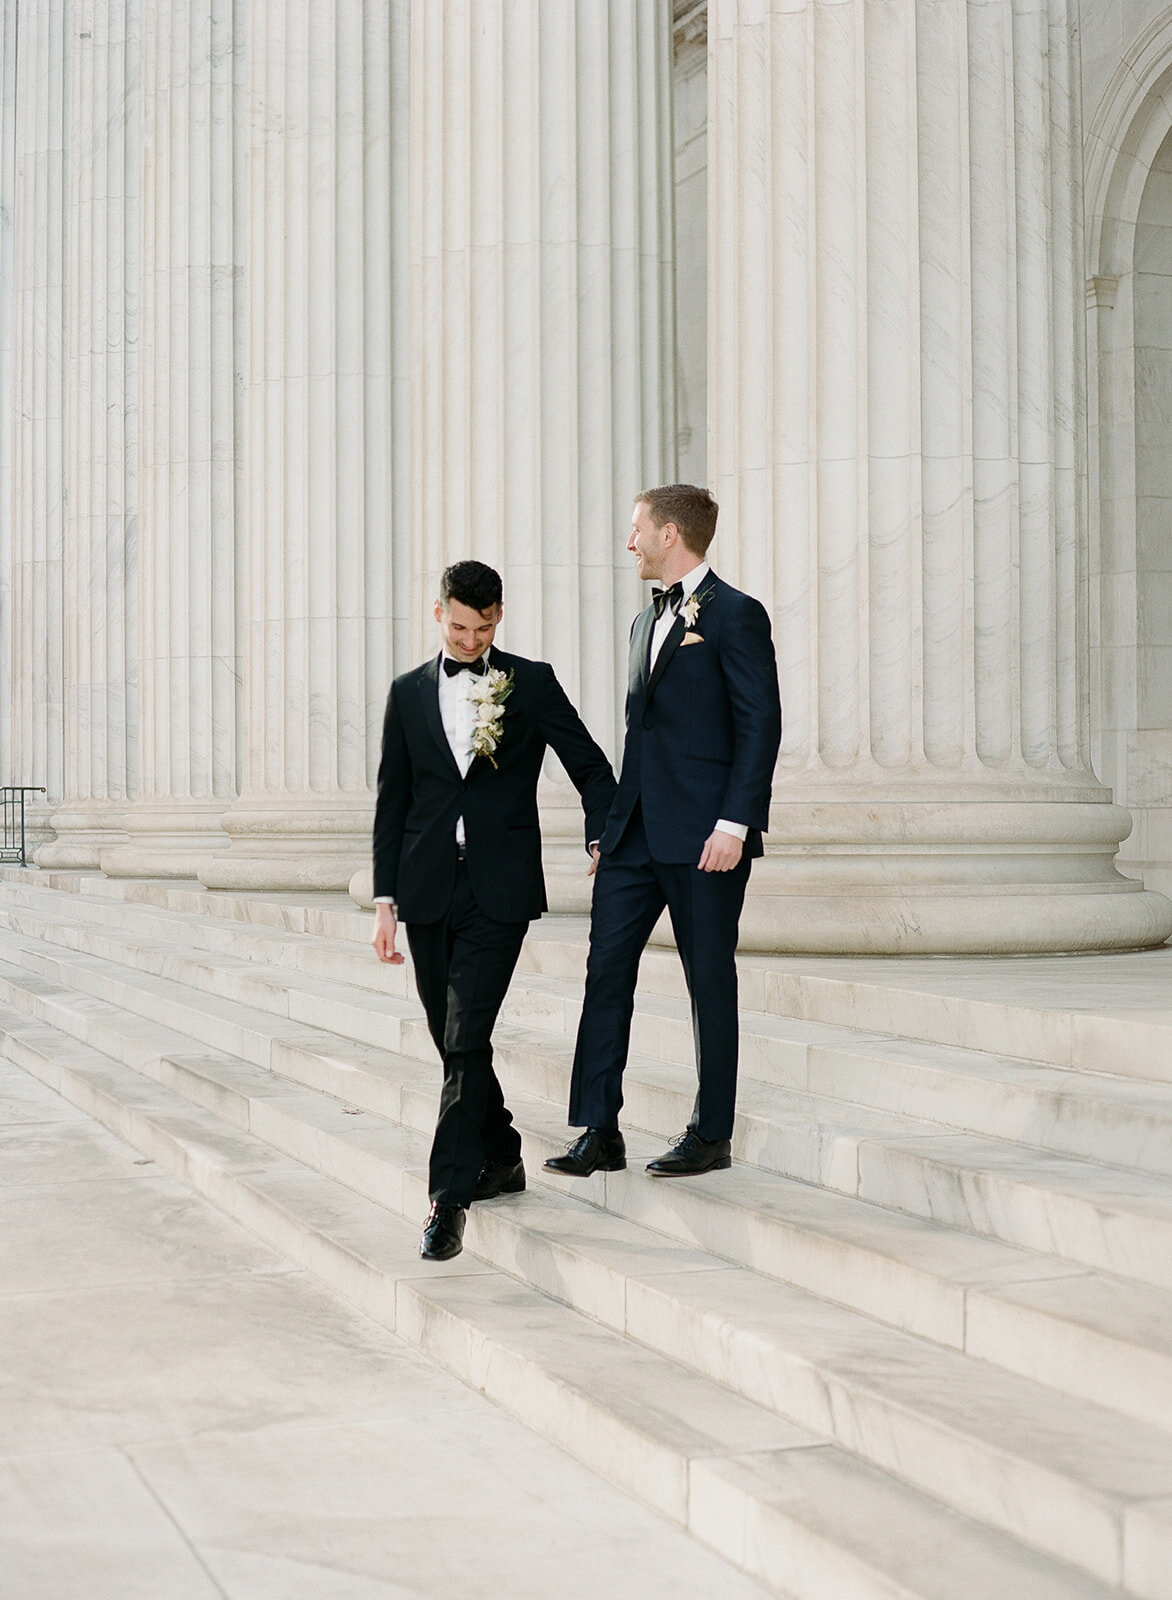 LGBTQ Grooms Portraits at Byron White Courthouse in Denver, Colorado.